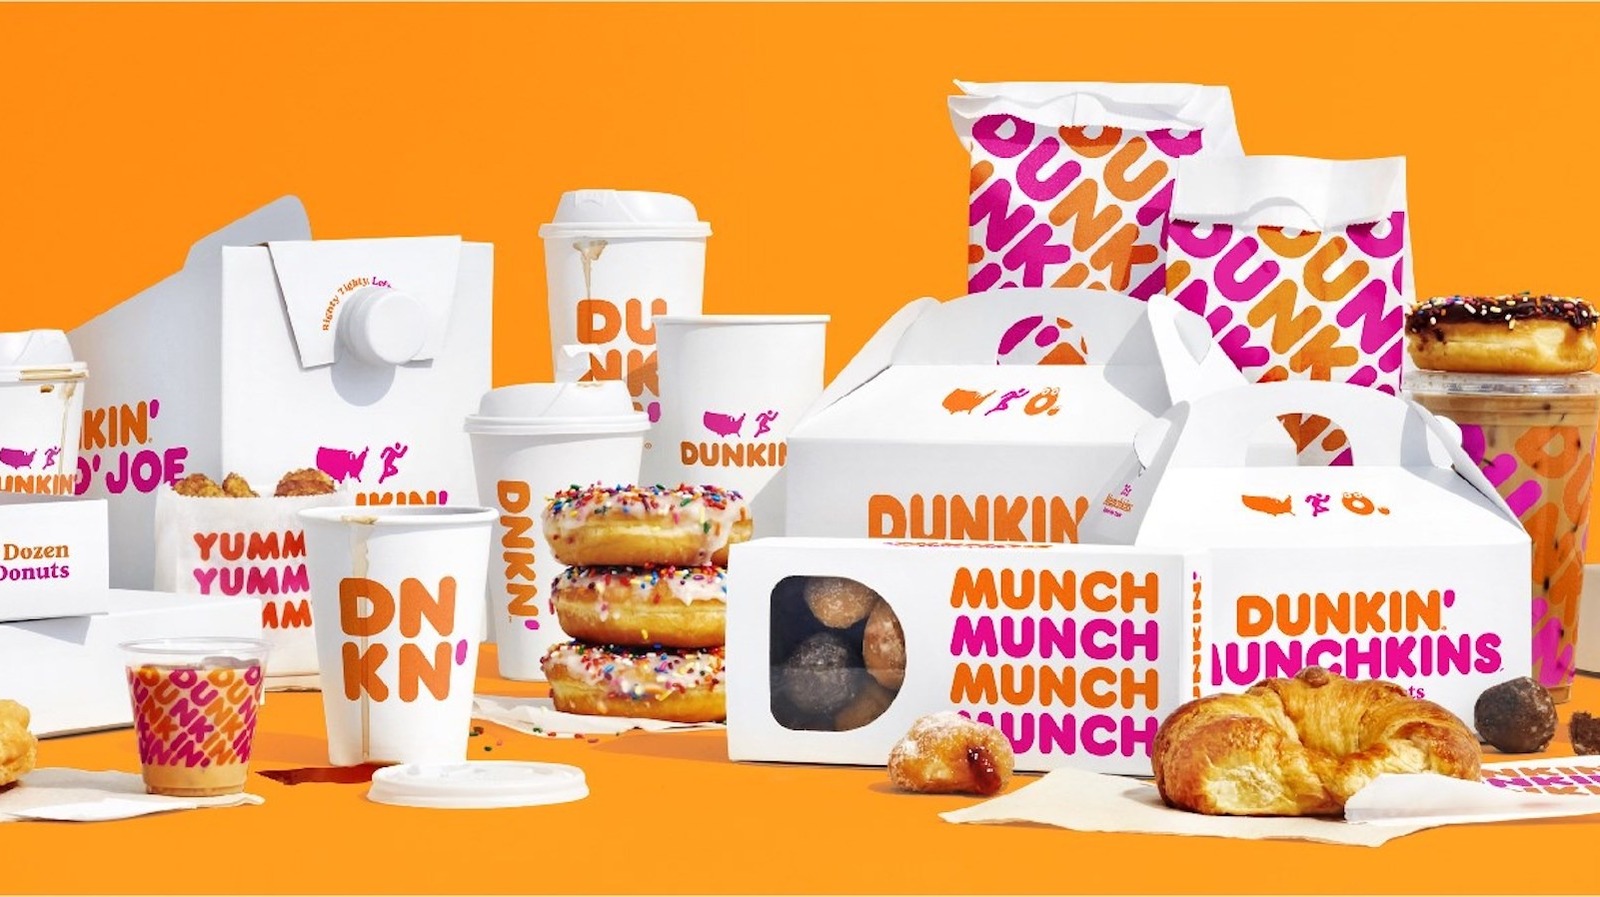 Dunkin' Popping Bubbles review: I ate it so you don't have to (and it's not  bubble tea) 